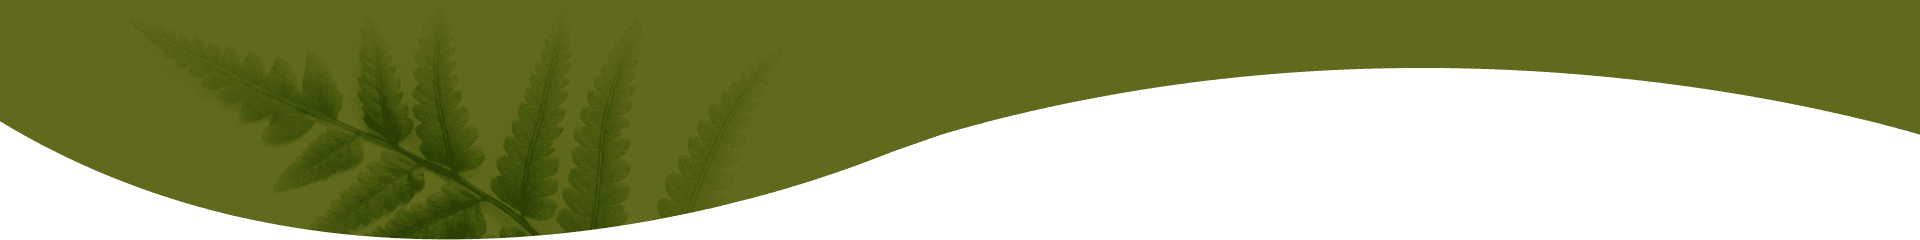 A green and brown background with a wave